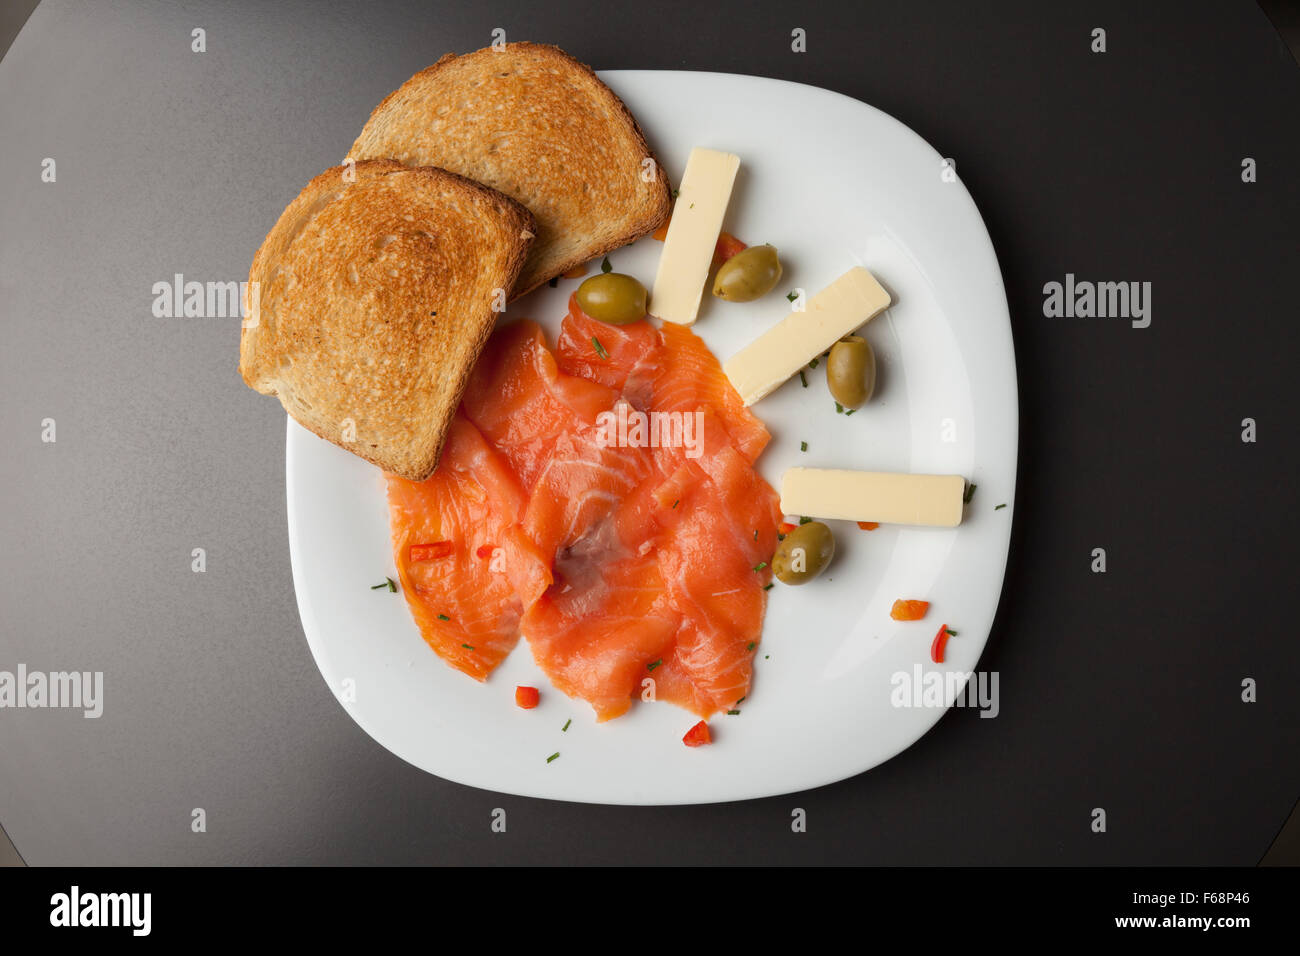 Smoked salmon filets with toasted bread and olives on white plate Stock Photo